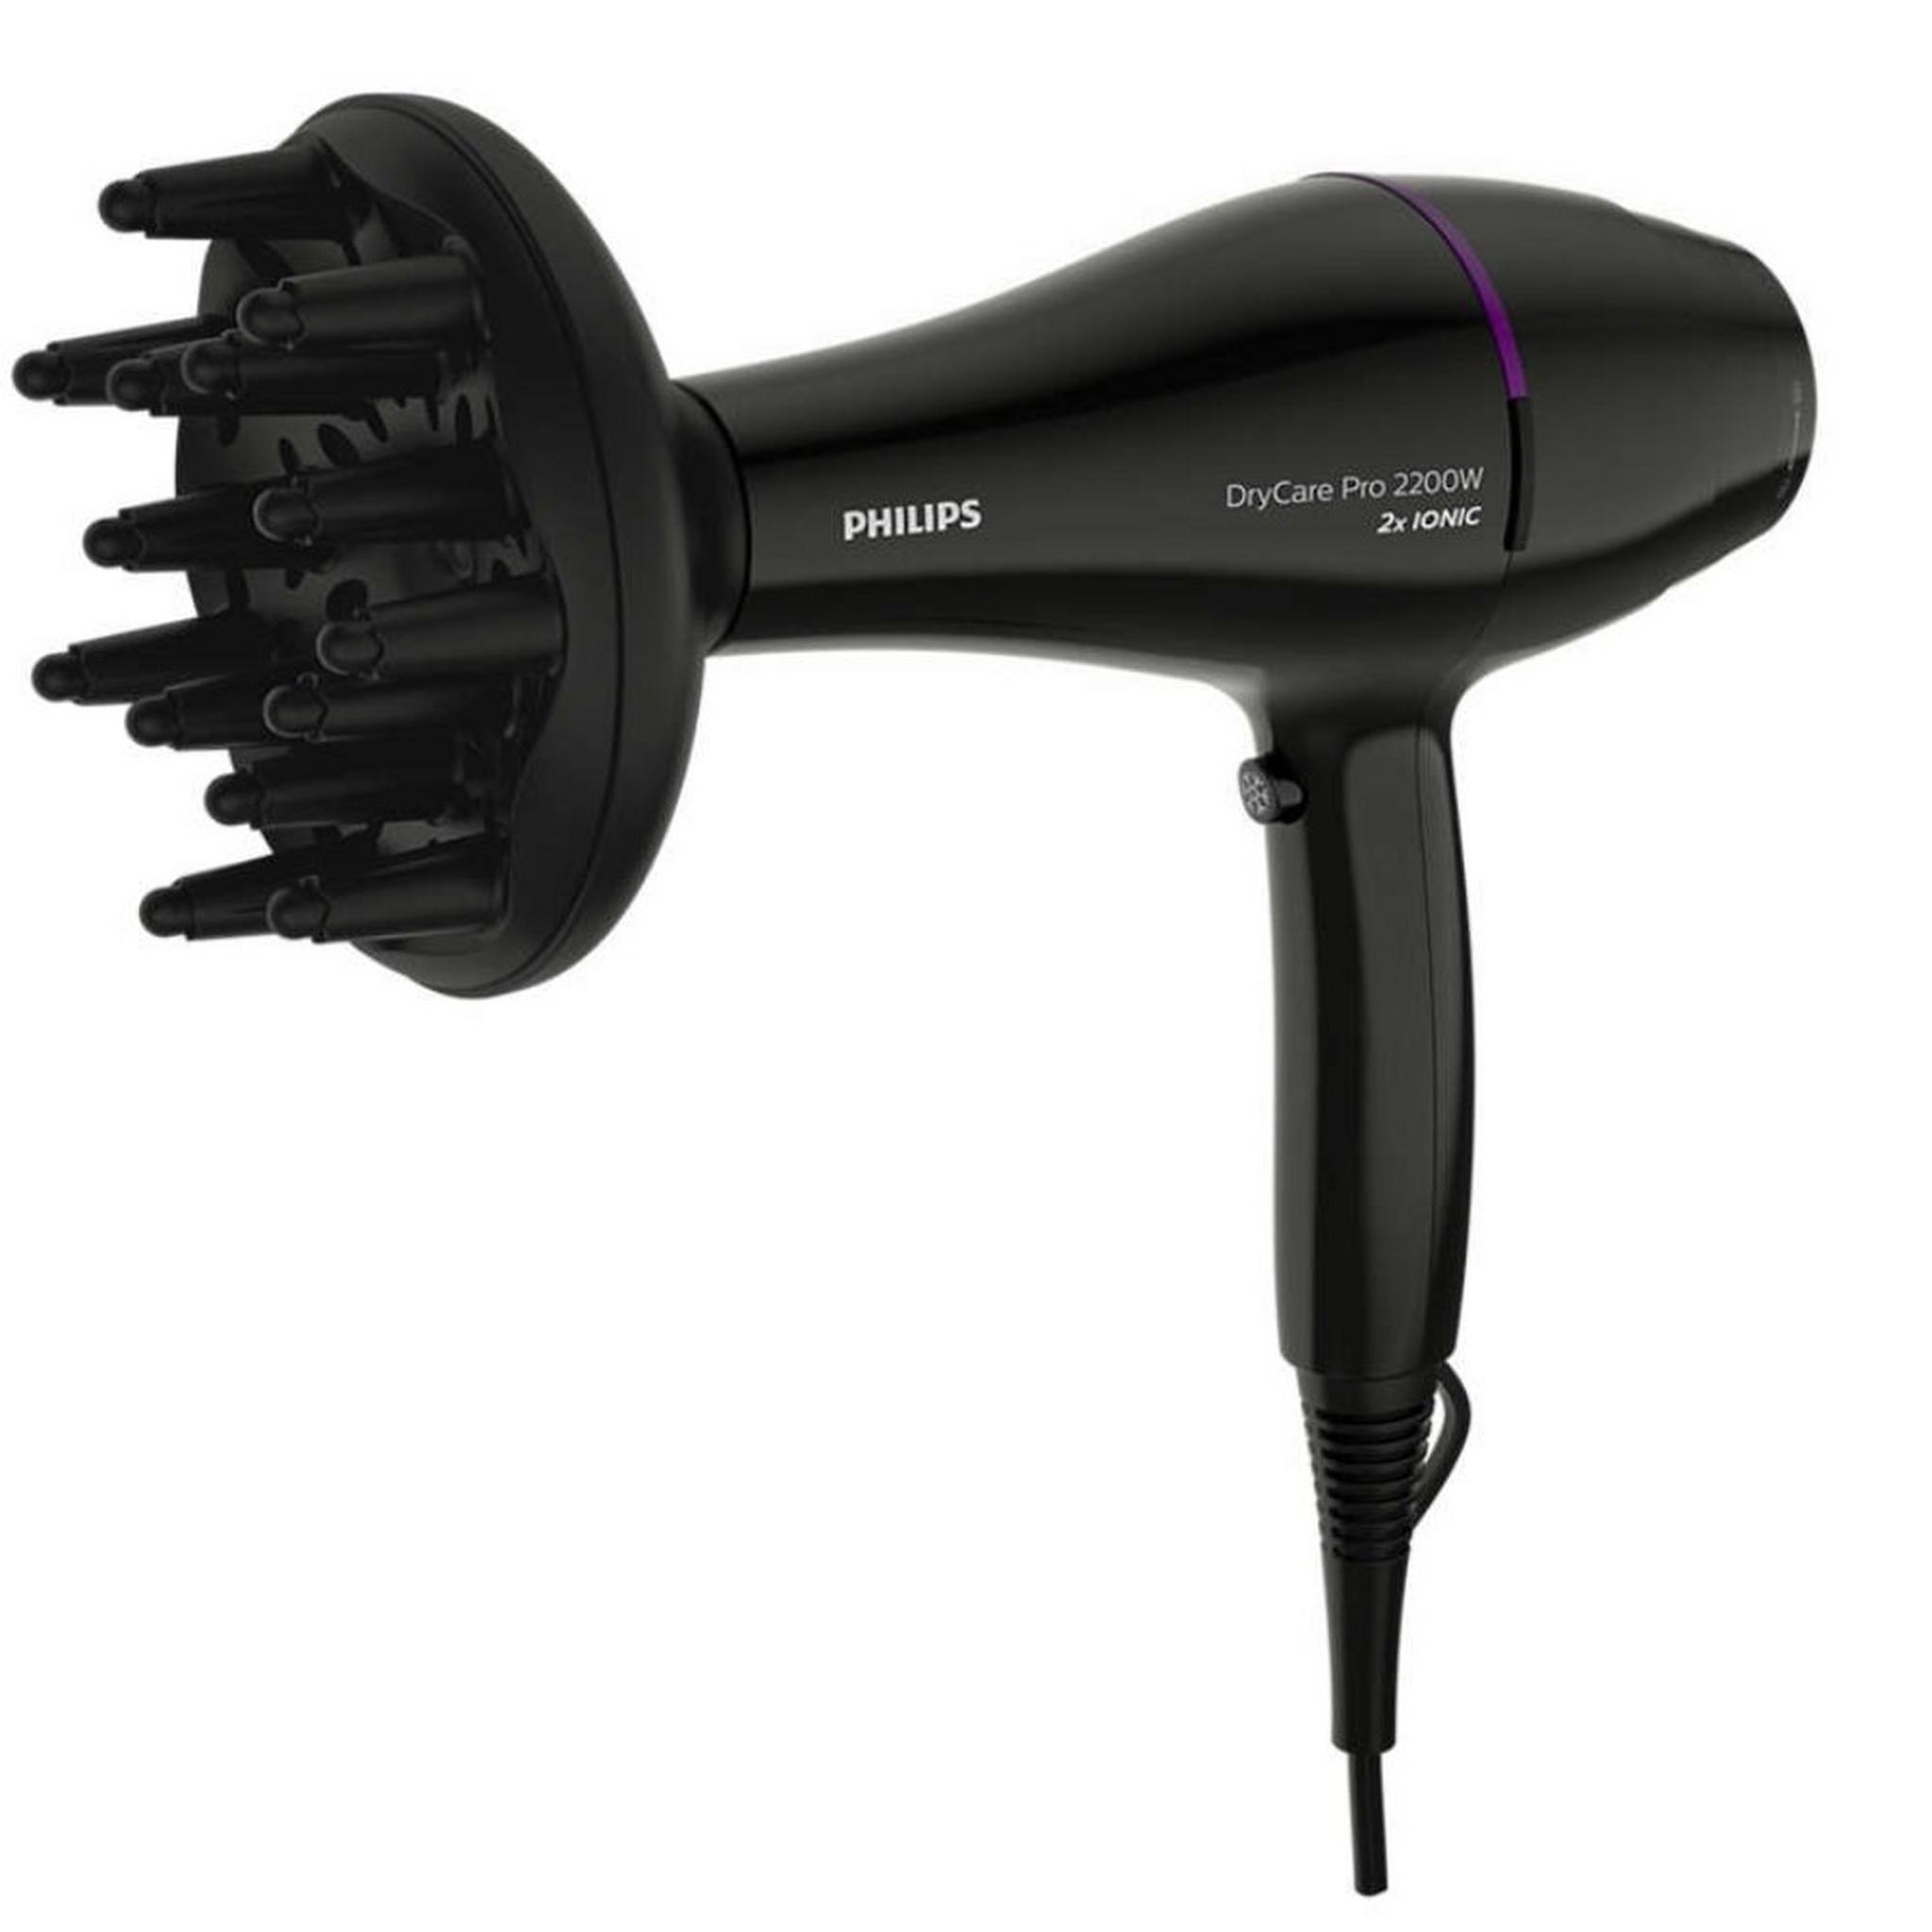 Philips DryCare Pro Hairdryer - Black